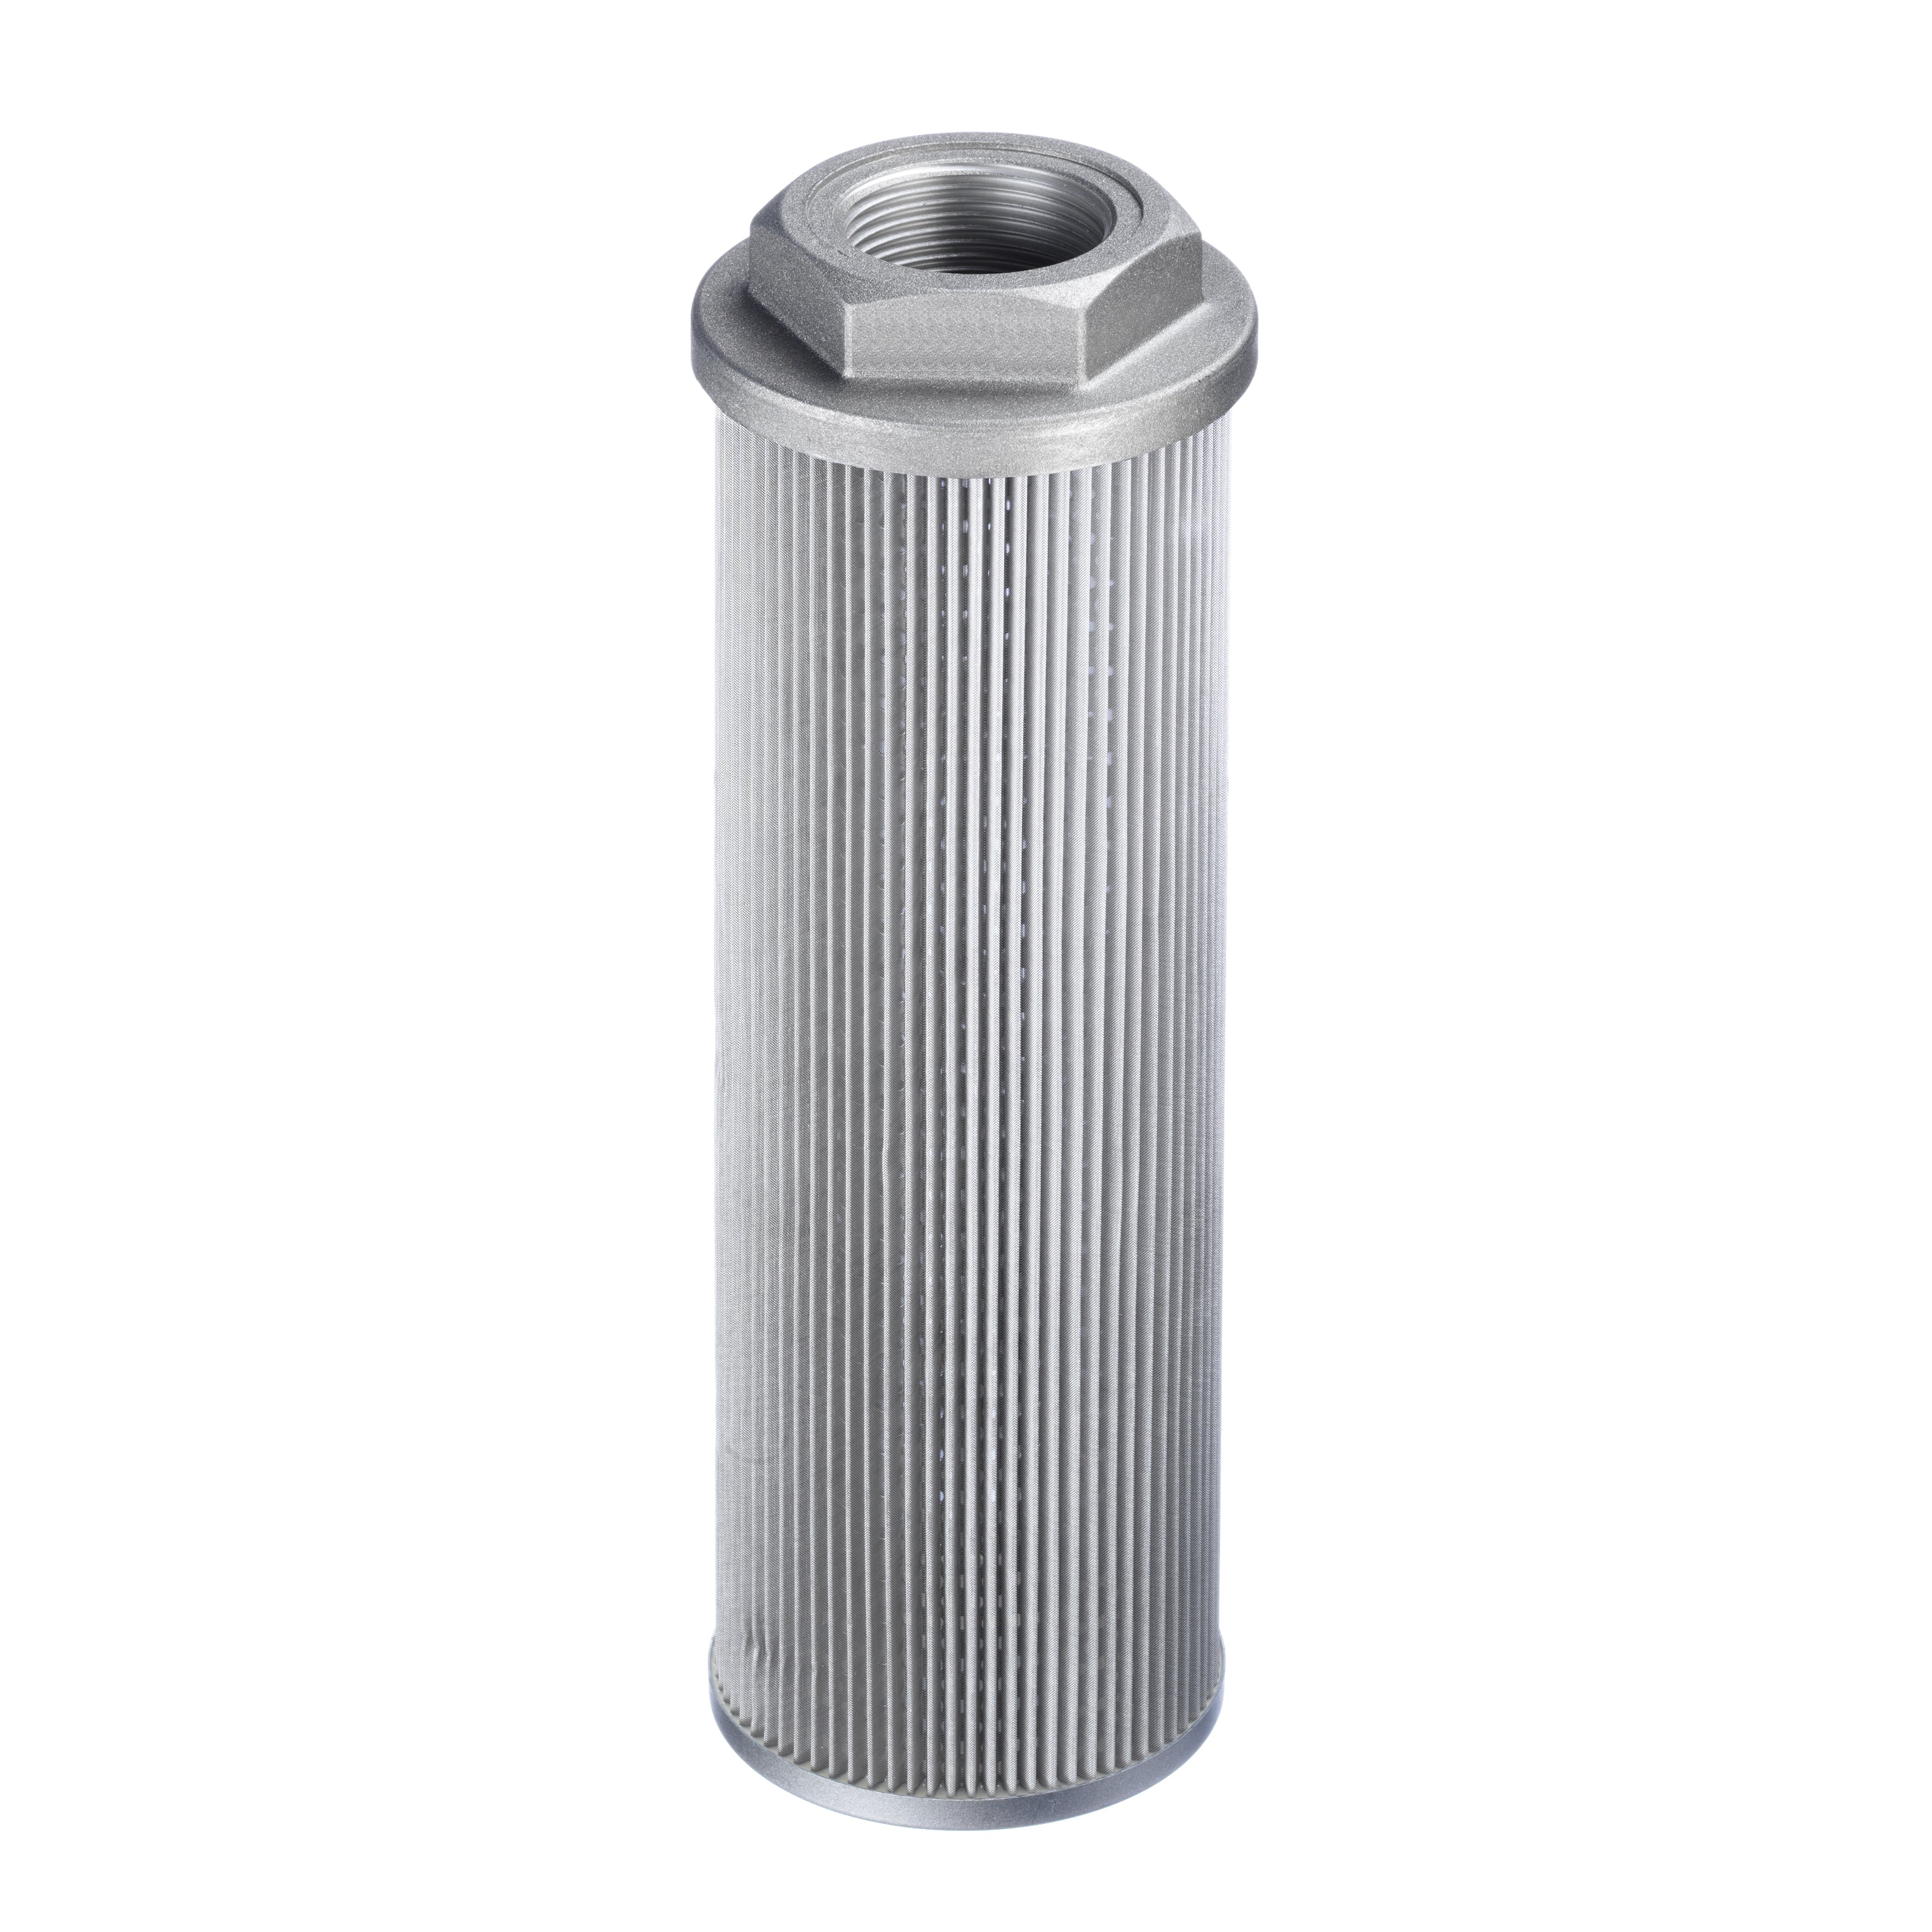 SUS-068-N12-105-125-A-B0.2 : Stauff Suction Strainer, Aluminum End Cap, 3/4" NPT, 6.5GPM, 125 Micron, 3psi Bypass